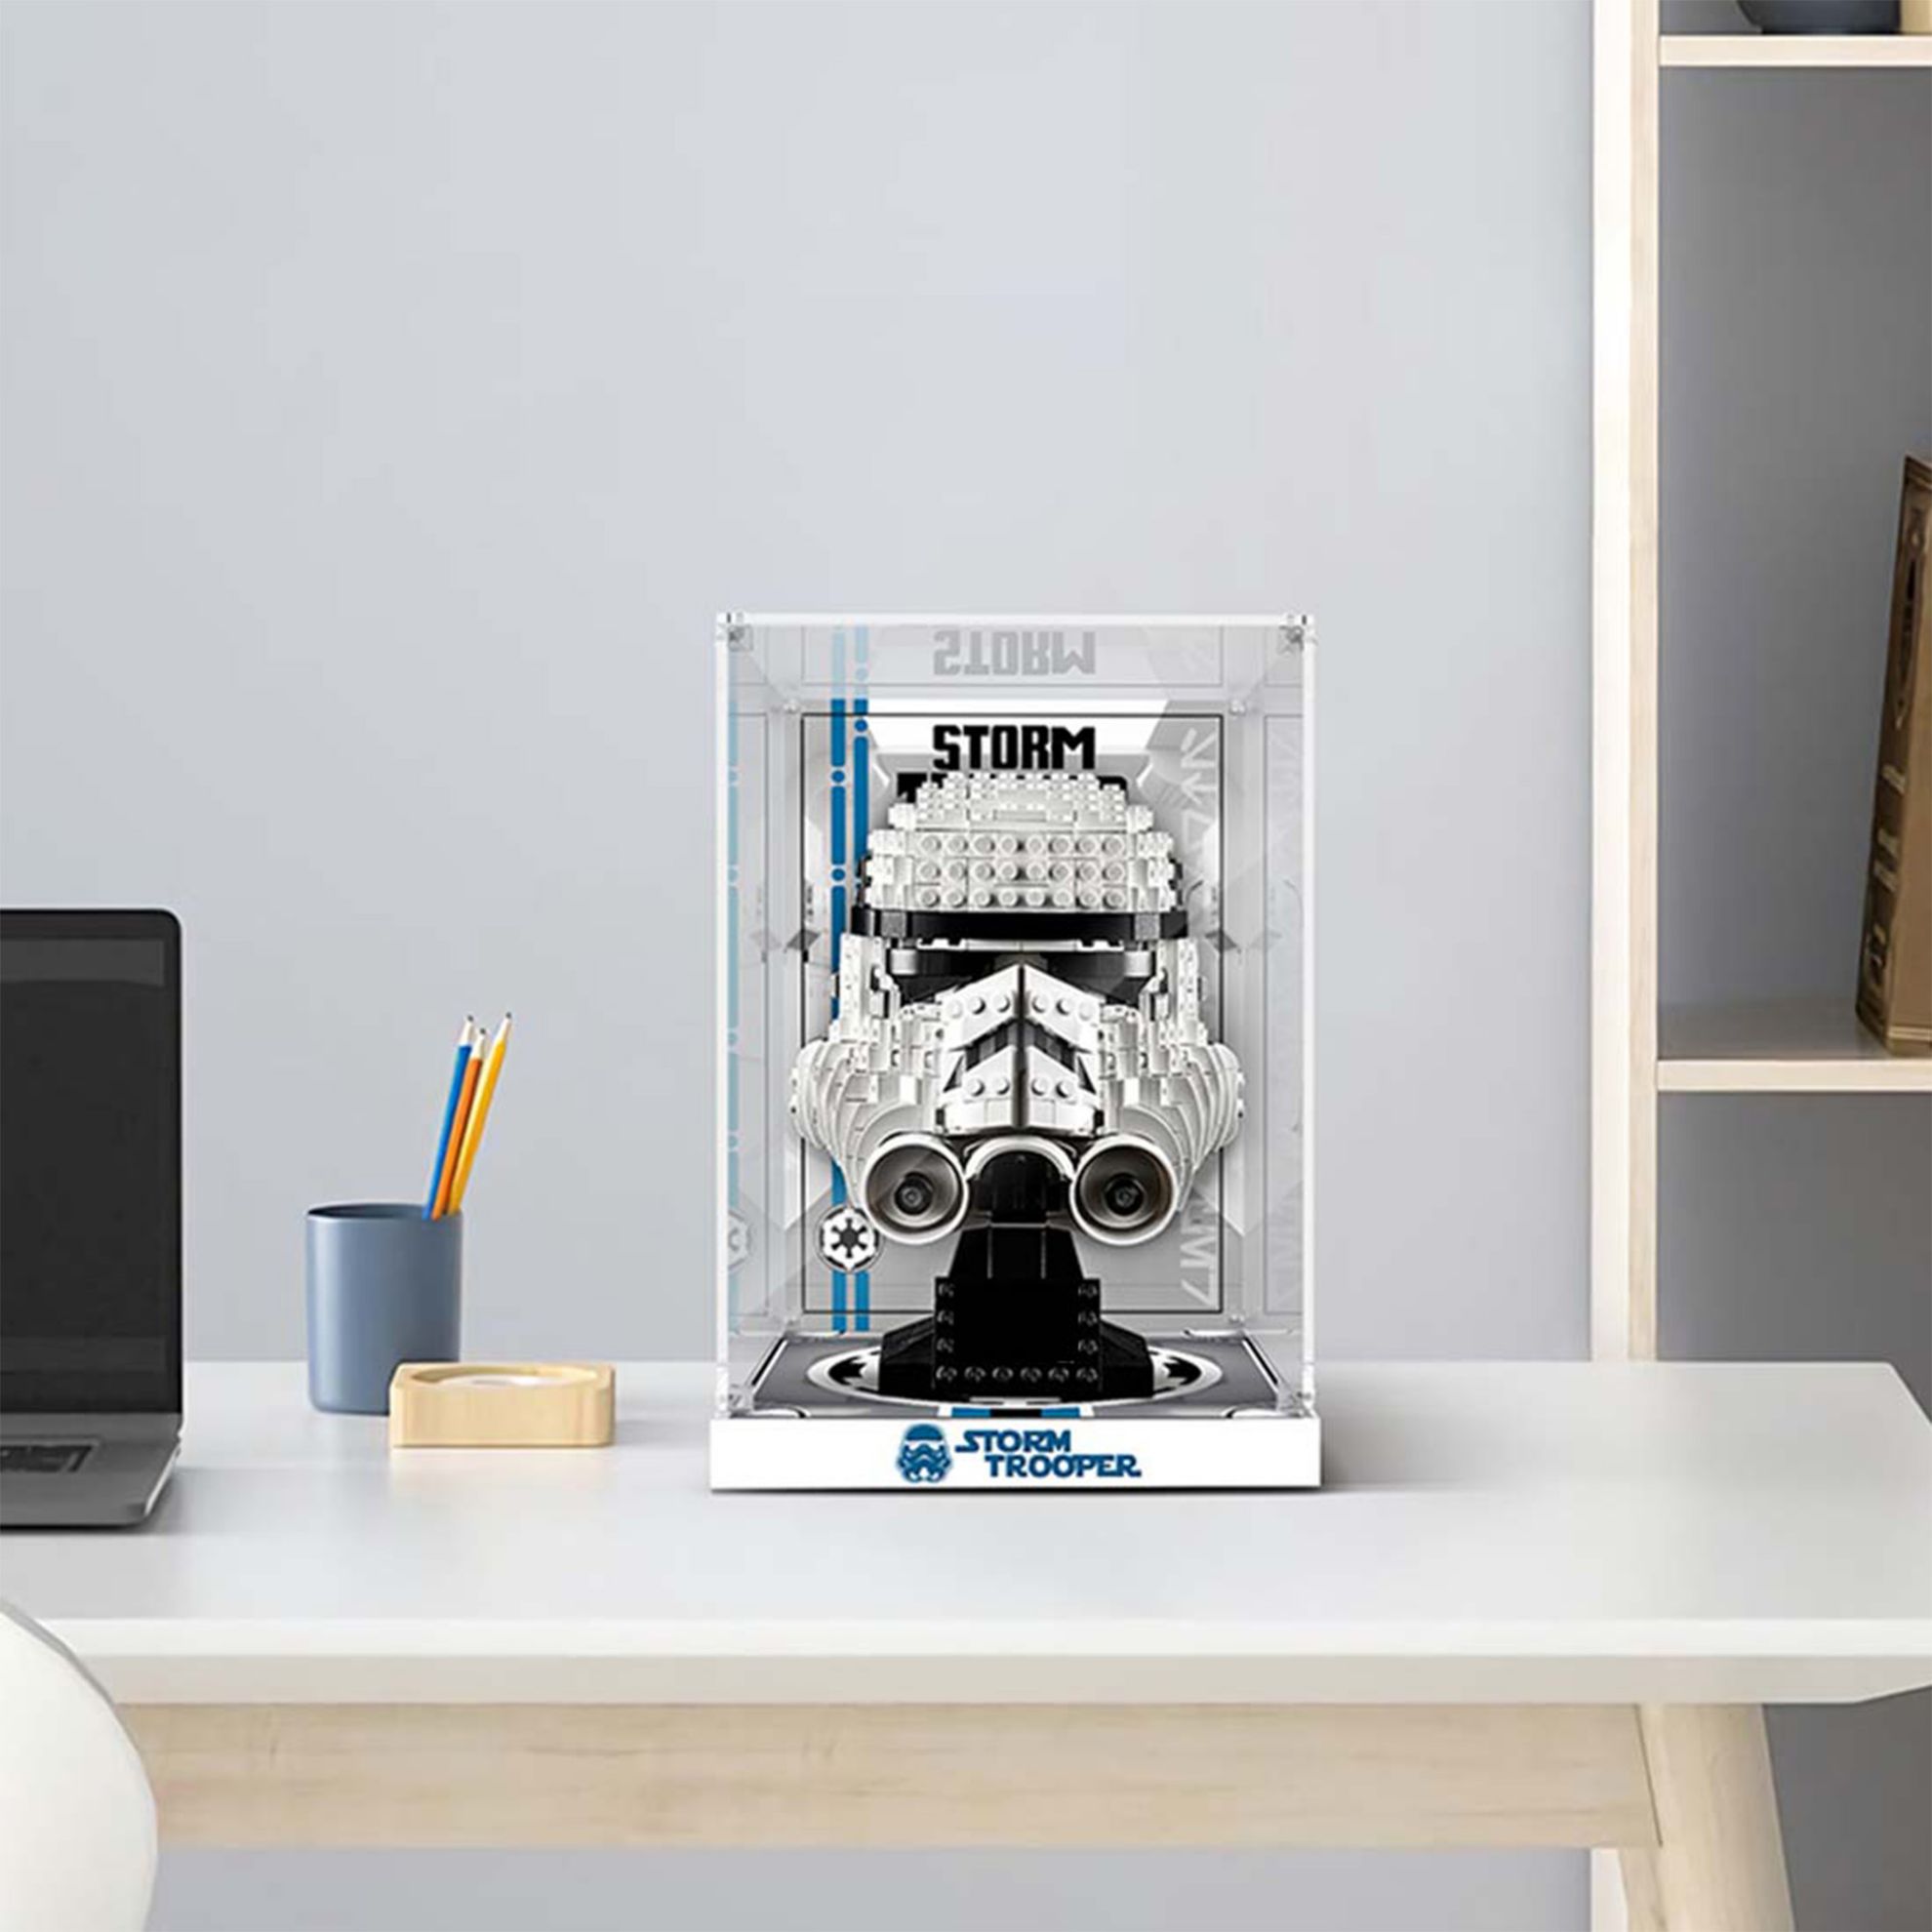 Picture of Acrylic Display Box for Storm Trooper 75276 Model Building Blocks